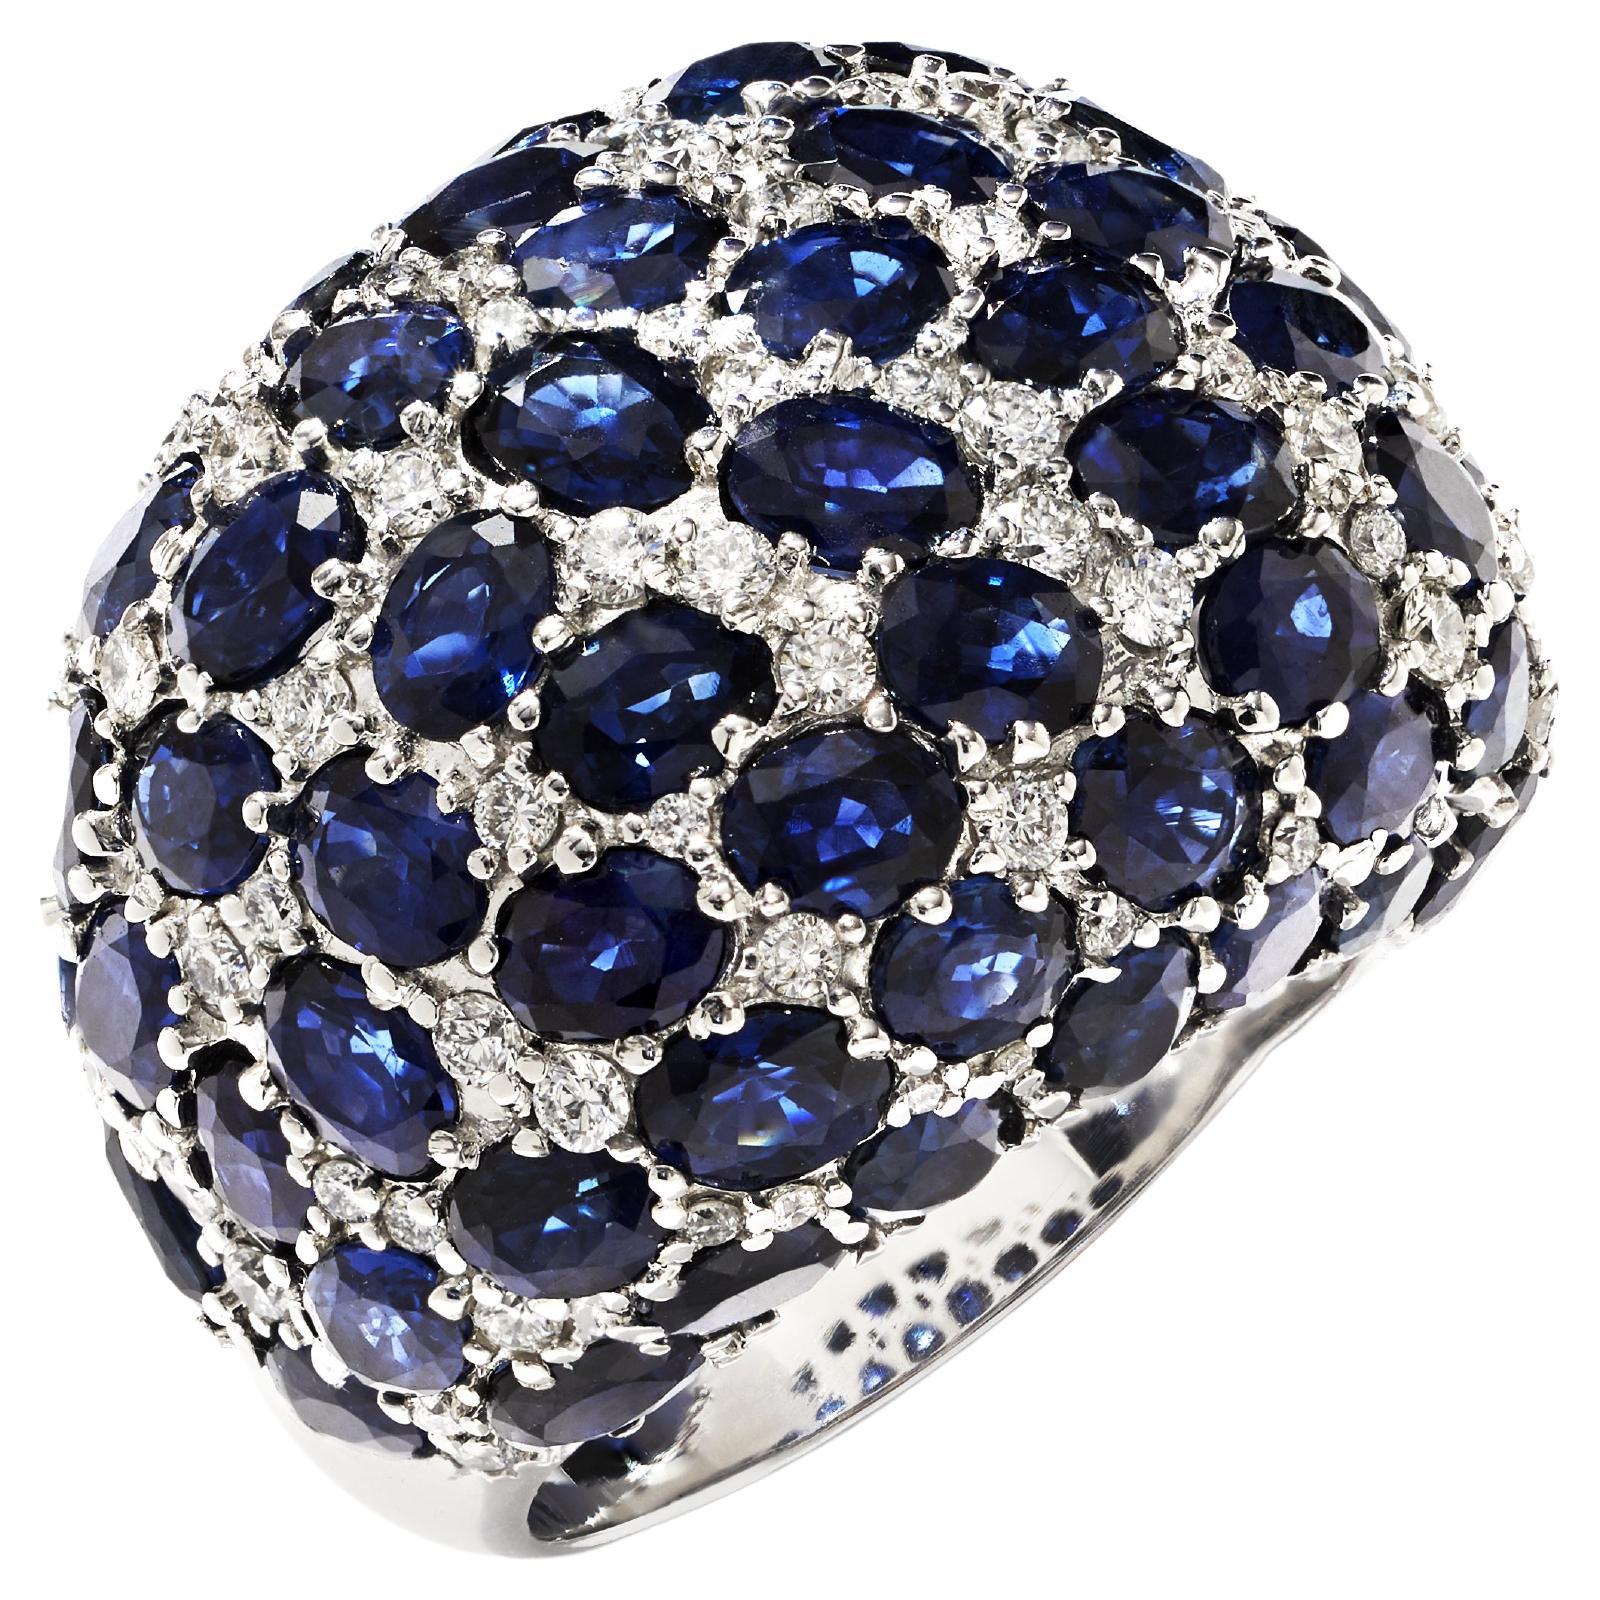 Blue Sapphire & Diamond Cocktail Ring Set in 18k White Gold by Shirin Uma For Sale